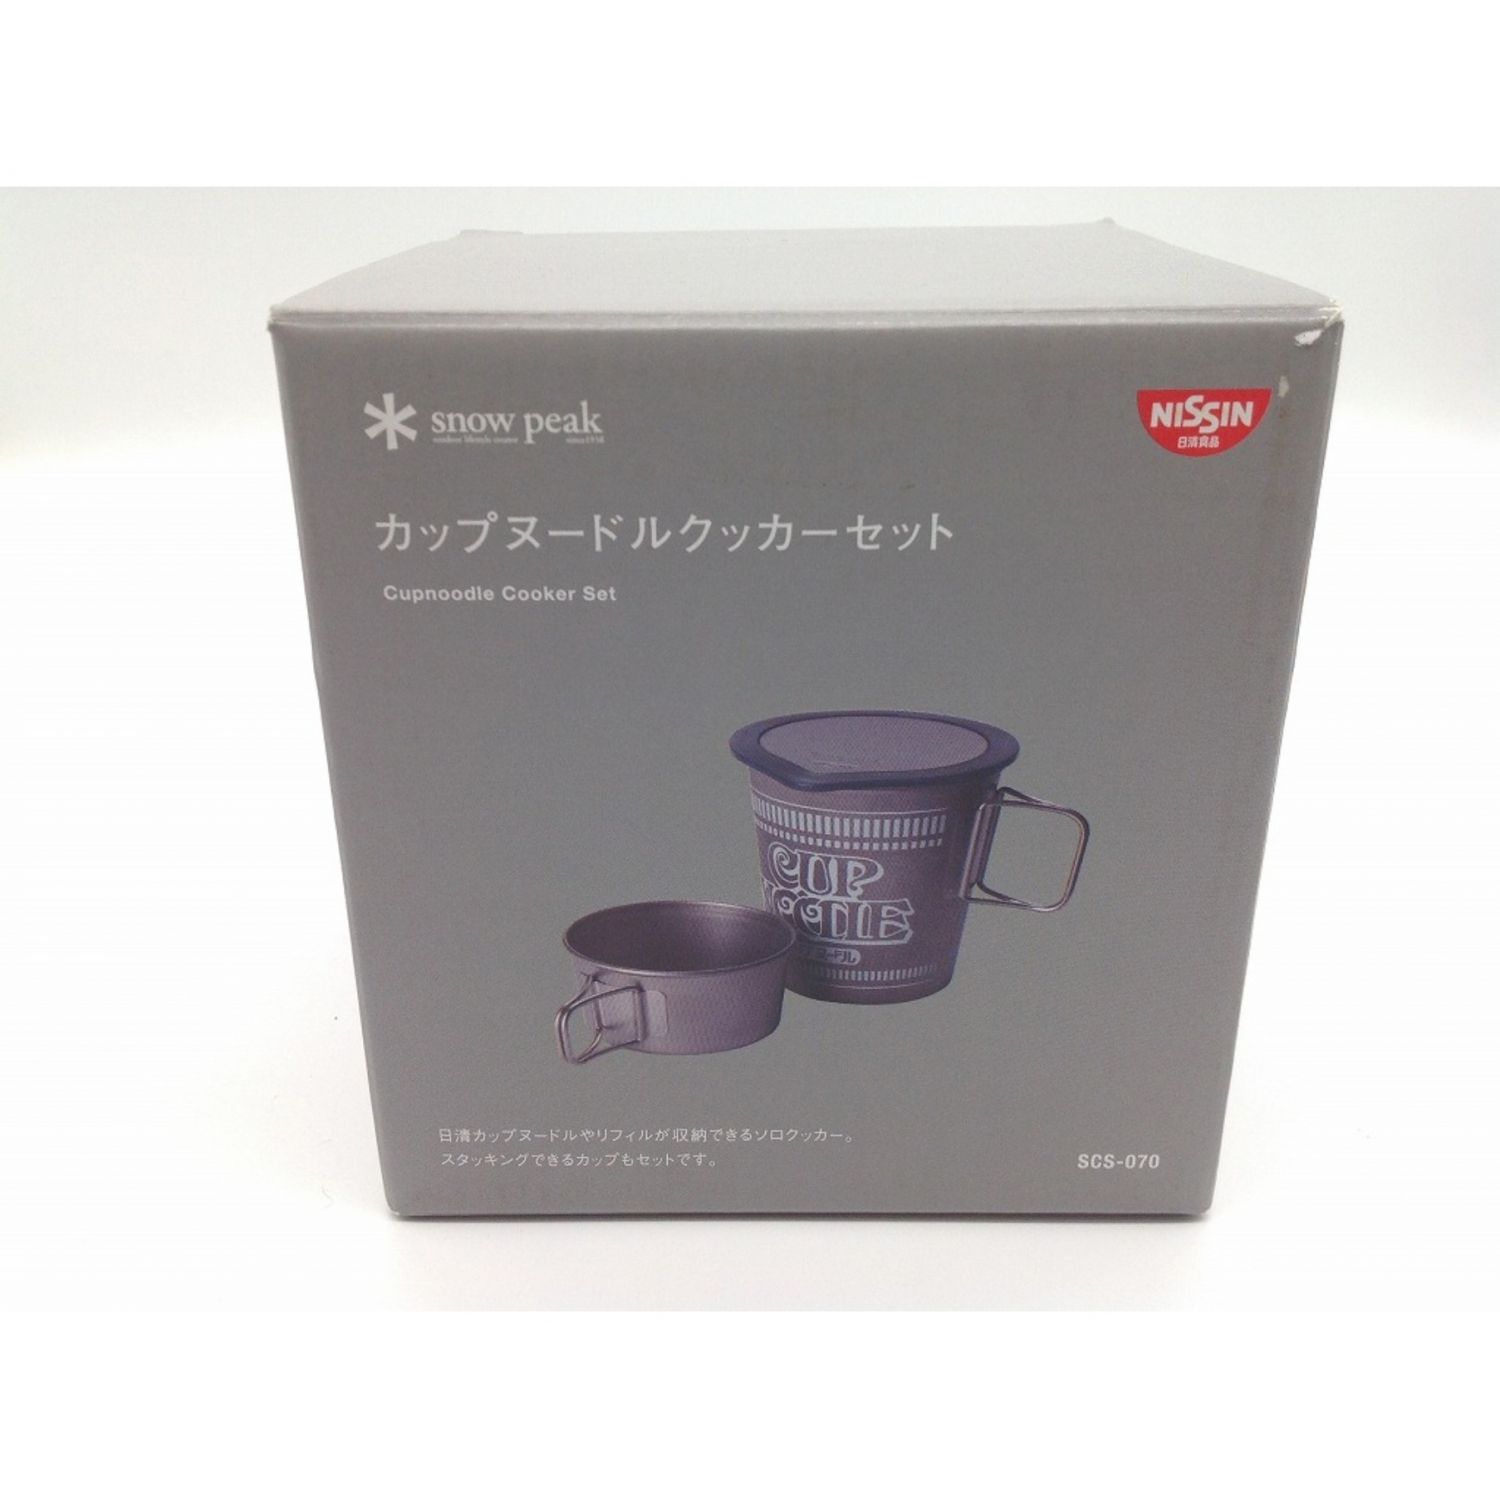 Snow Peak x Nissin Collaboration Cup Noodle Cookers SCS-070 Outdoor Cooking solo 